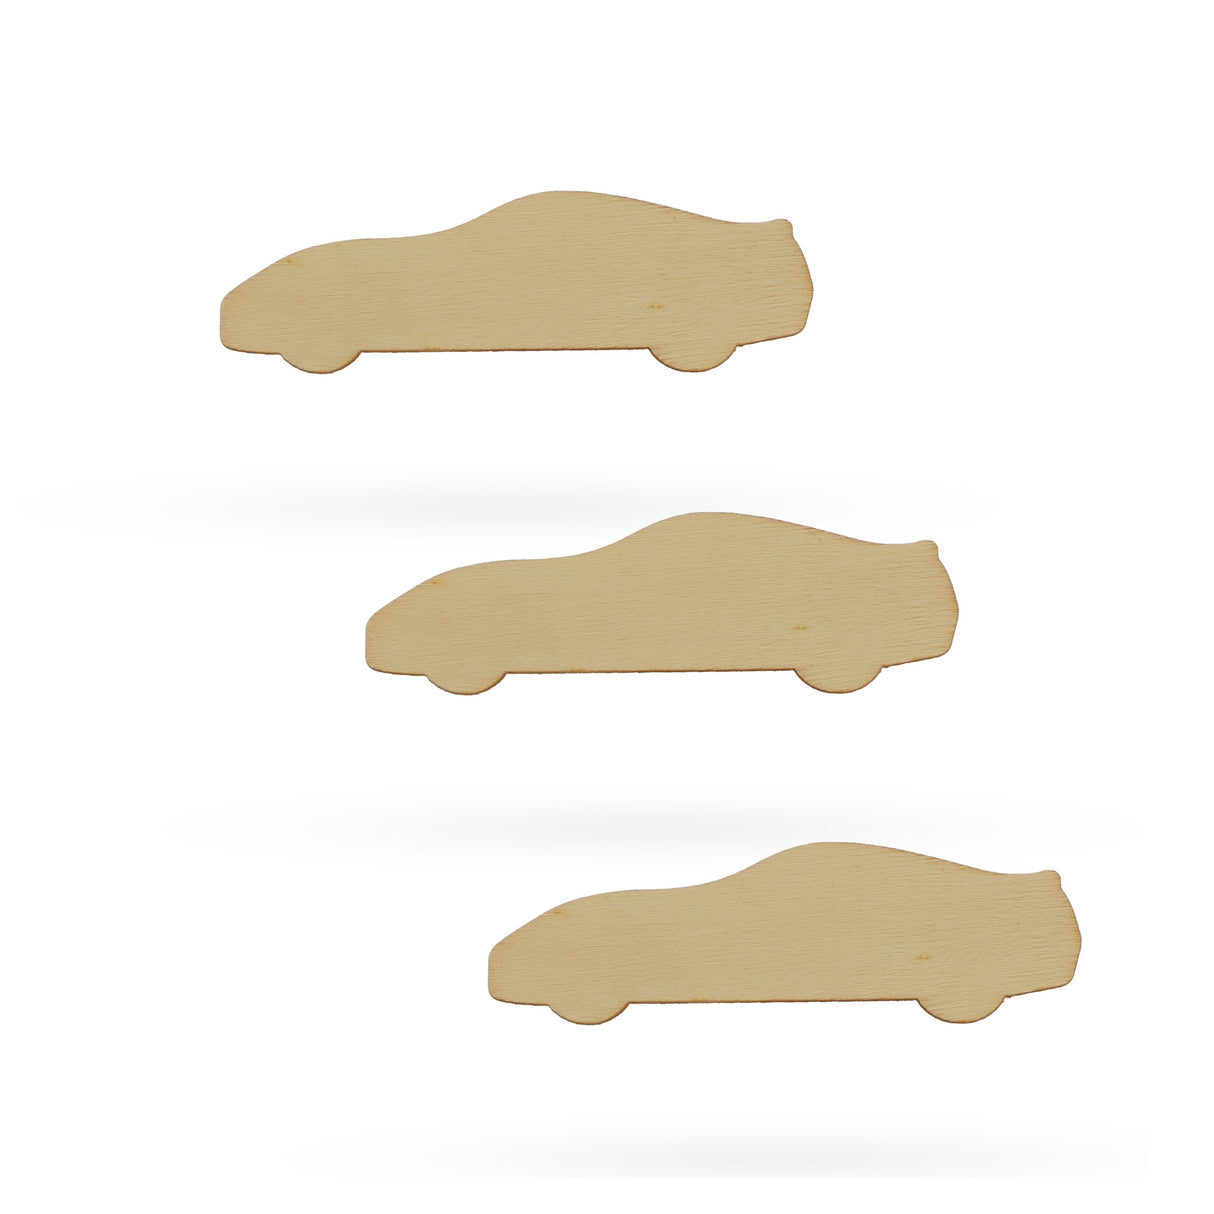 3 Race Cars Unfinished Wooden Shapes Craft Cutouts DIY Unpainted 3D Plaques 4 Inches in Beige color,  shape